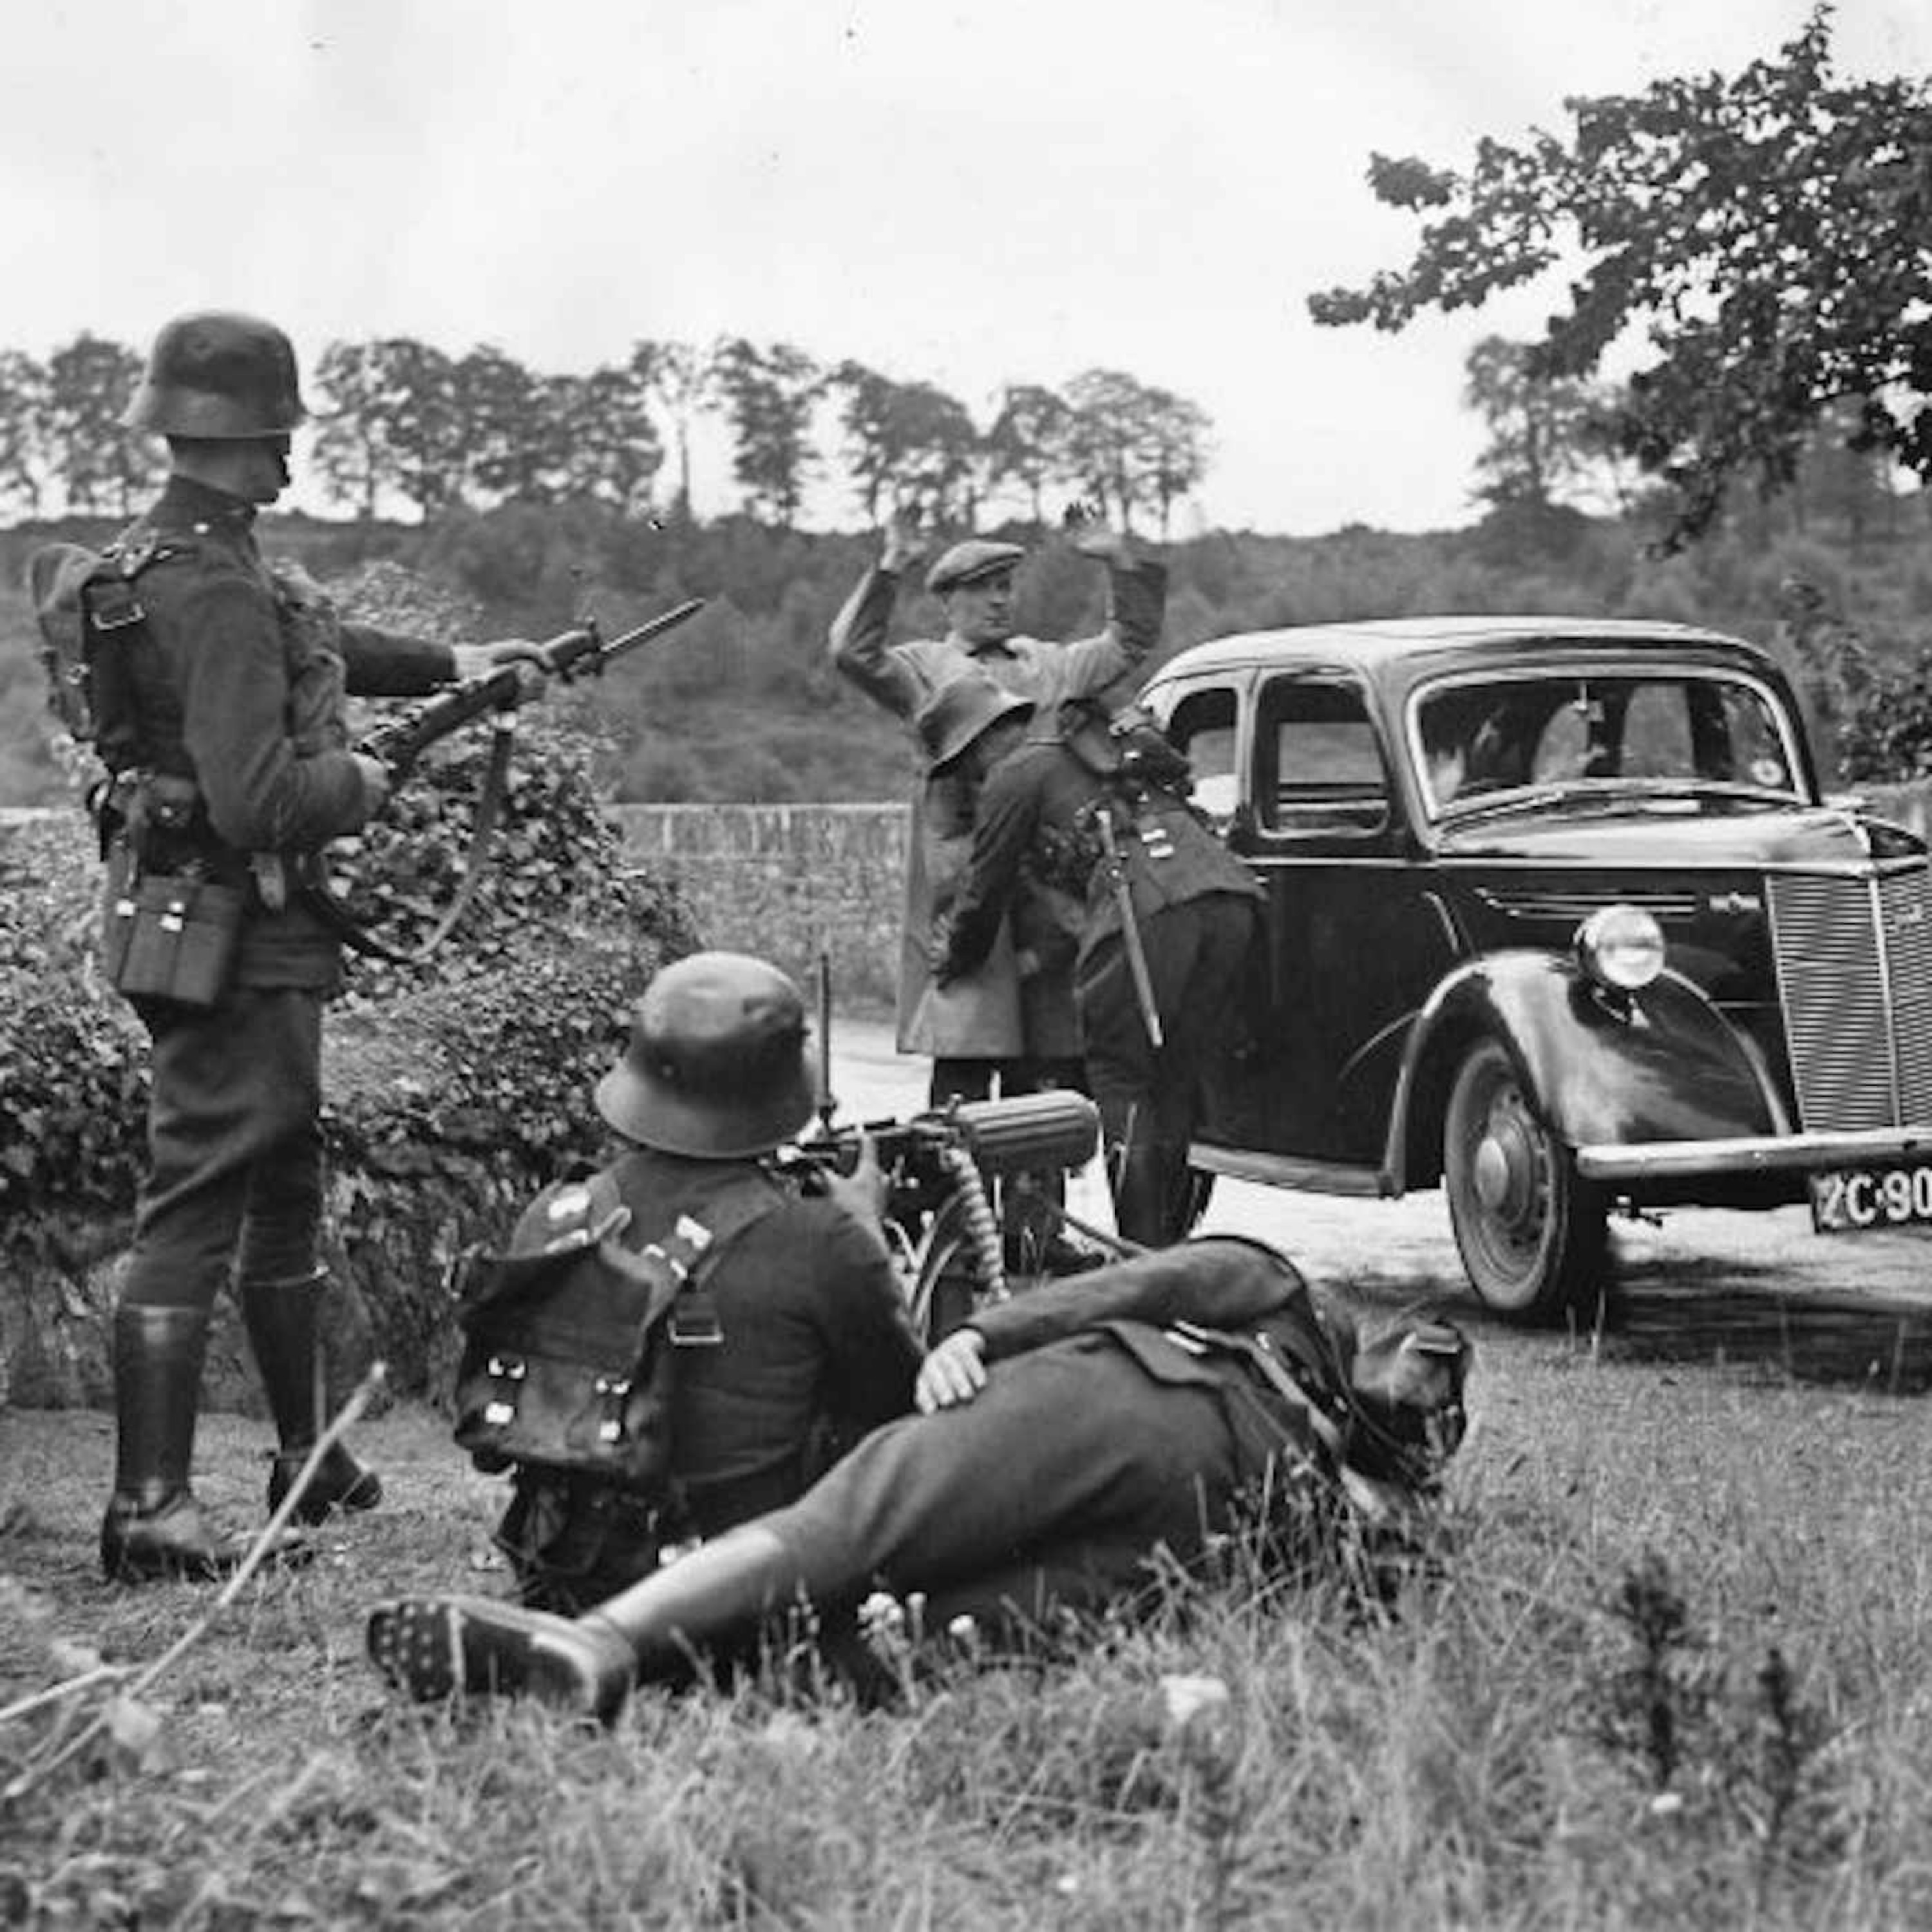 The Hunt for Nazi Spies in World War II